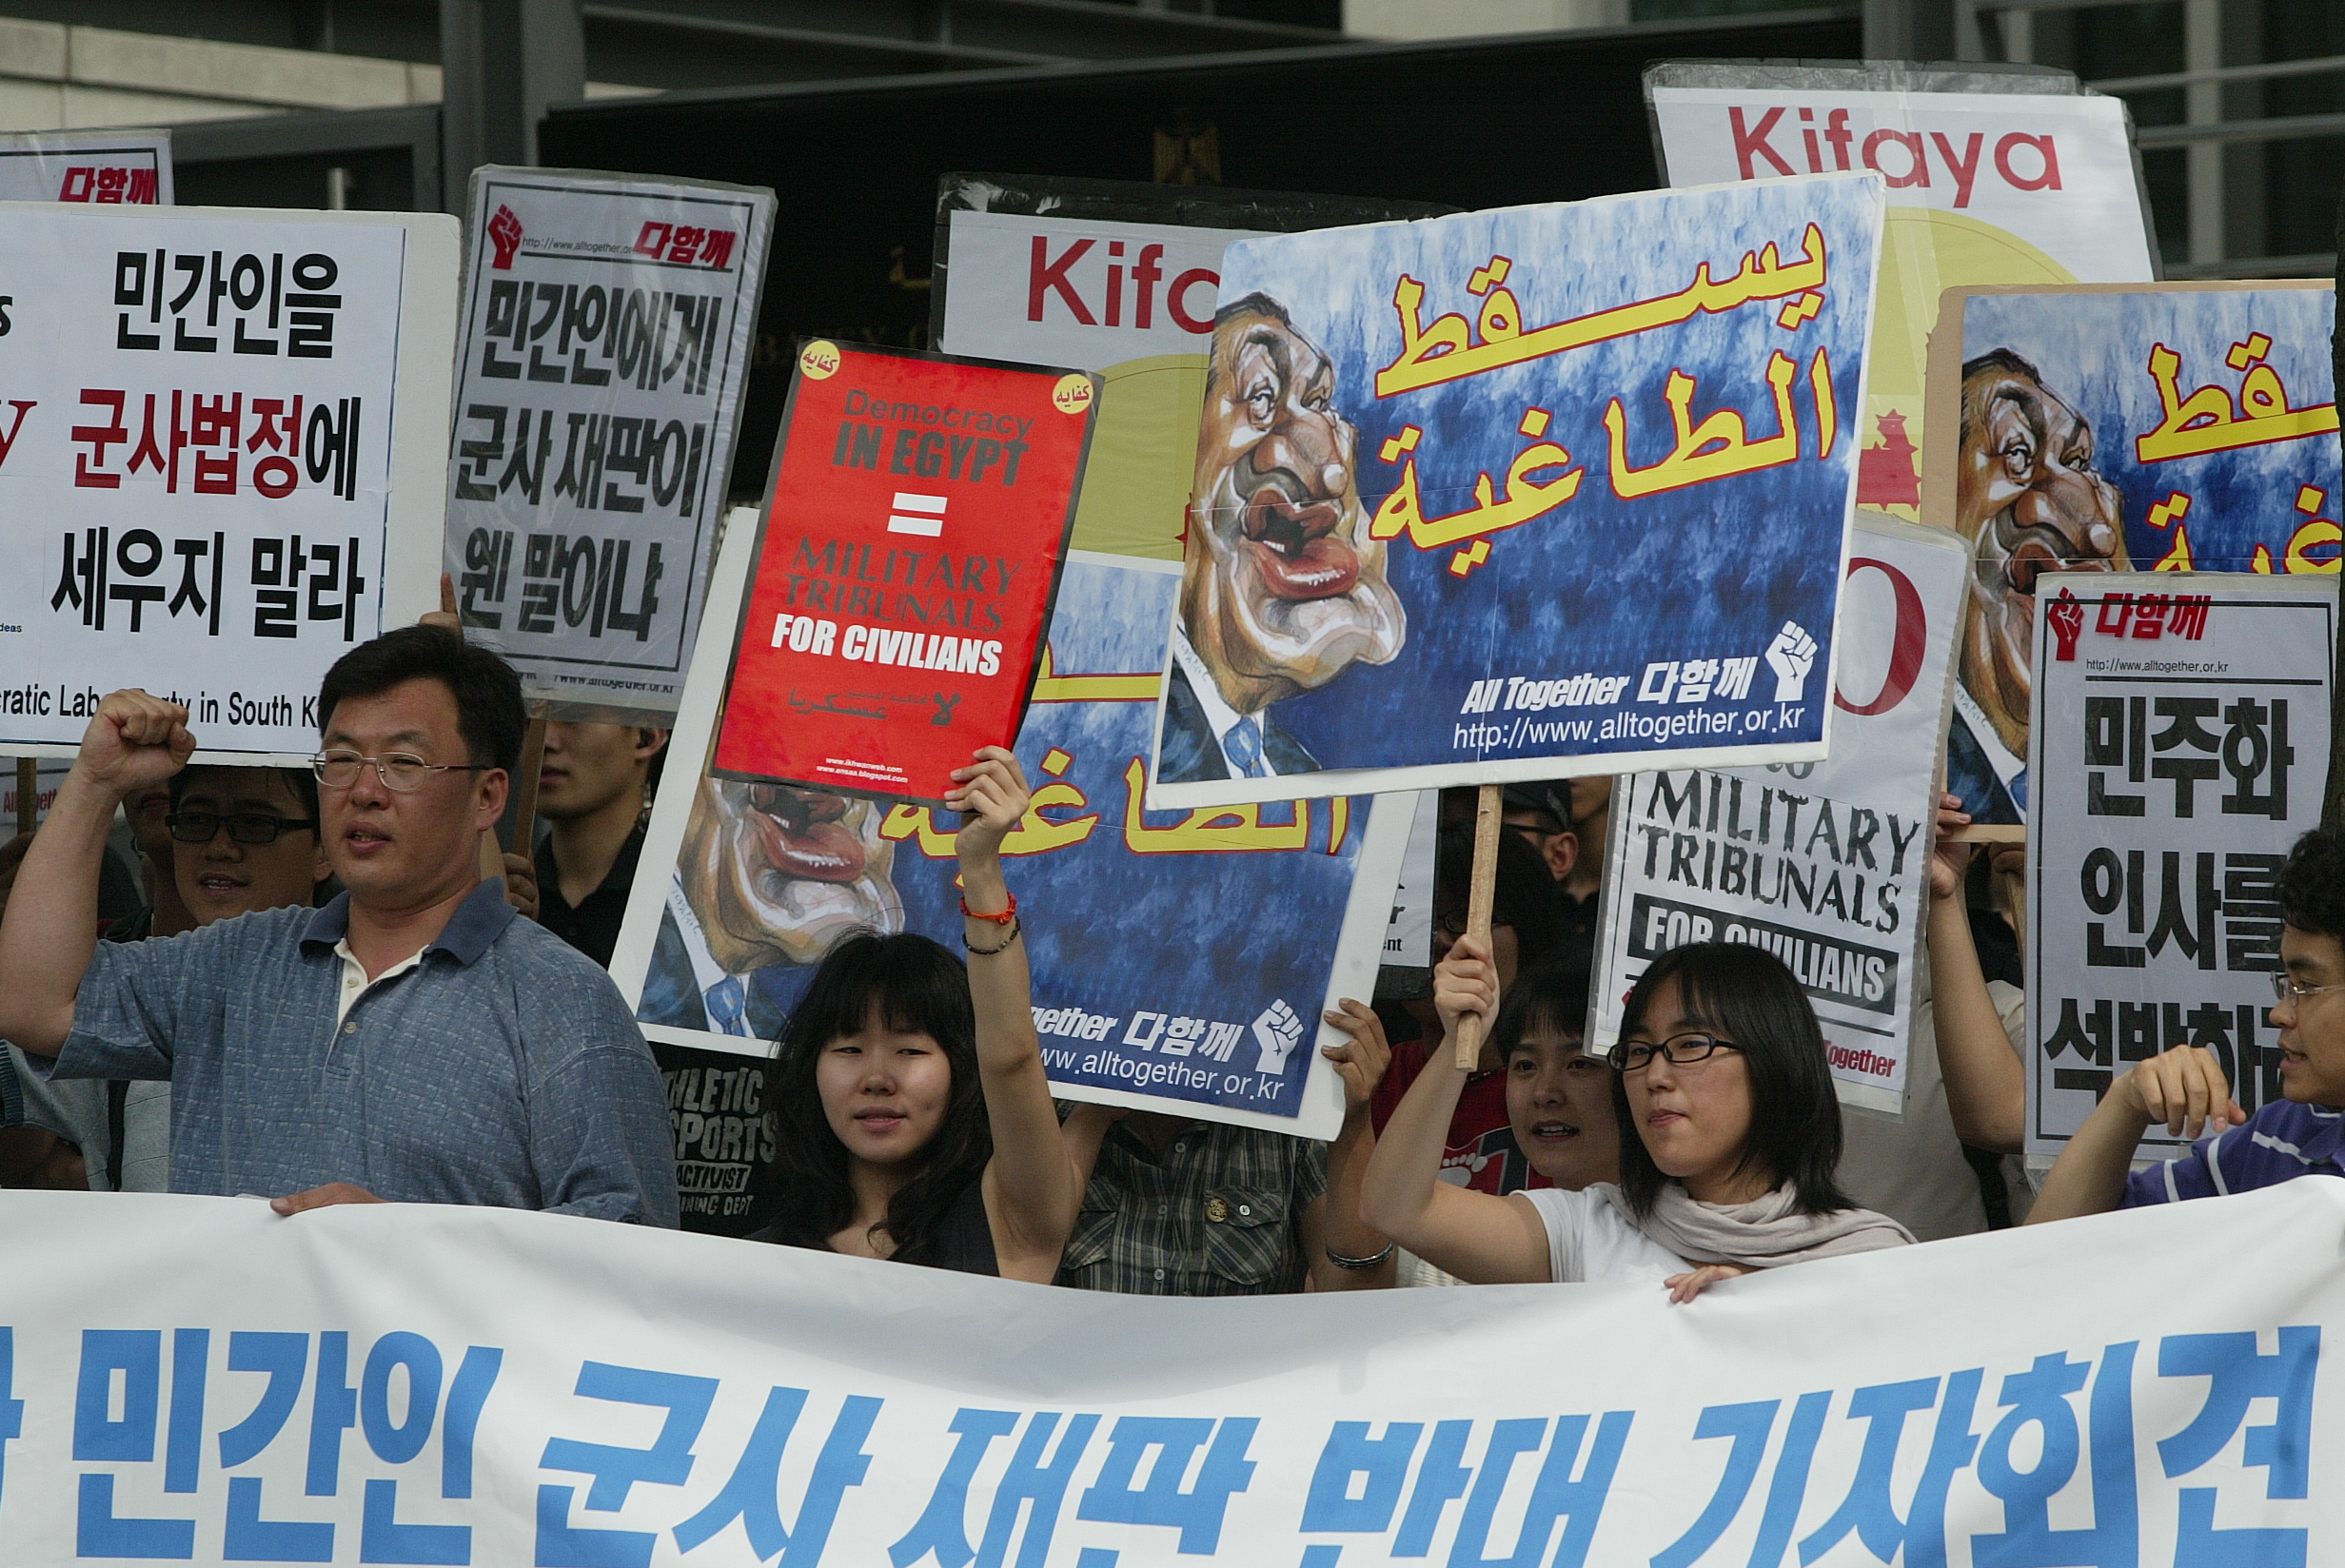 South Korean activists demonstrate in solidarity with Egyptian detainees, 4 June 2007. Photo courtesy of [All Together]